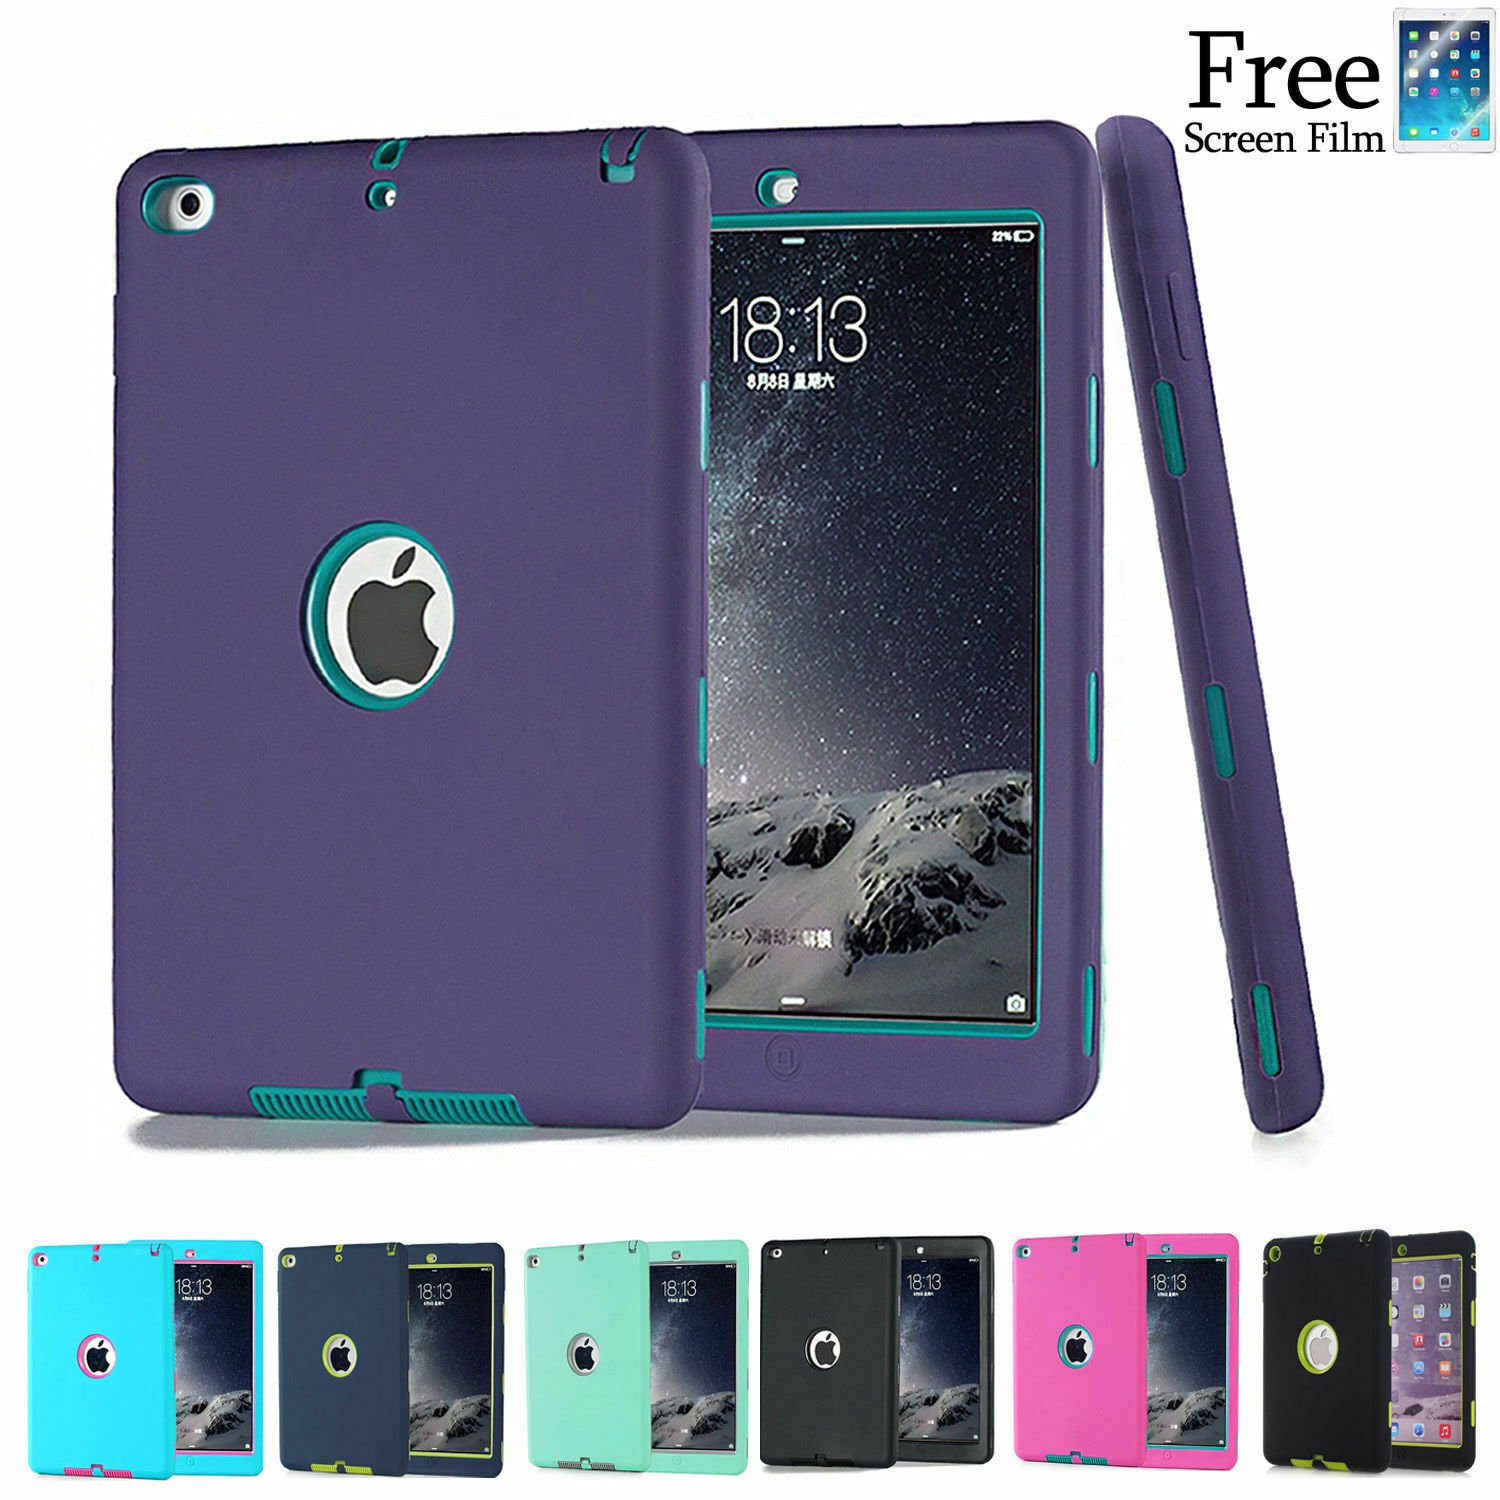 Heavy Duty Shockproof Case Cover For New iPad 6th Gen 9.7" iPad 4 3 2 mini Air 1